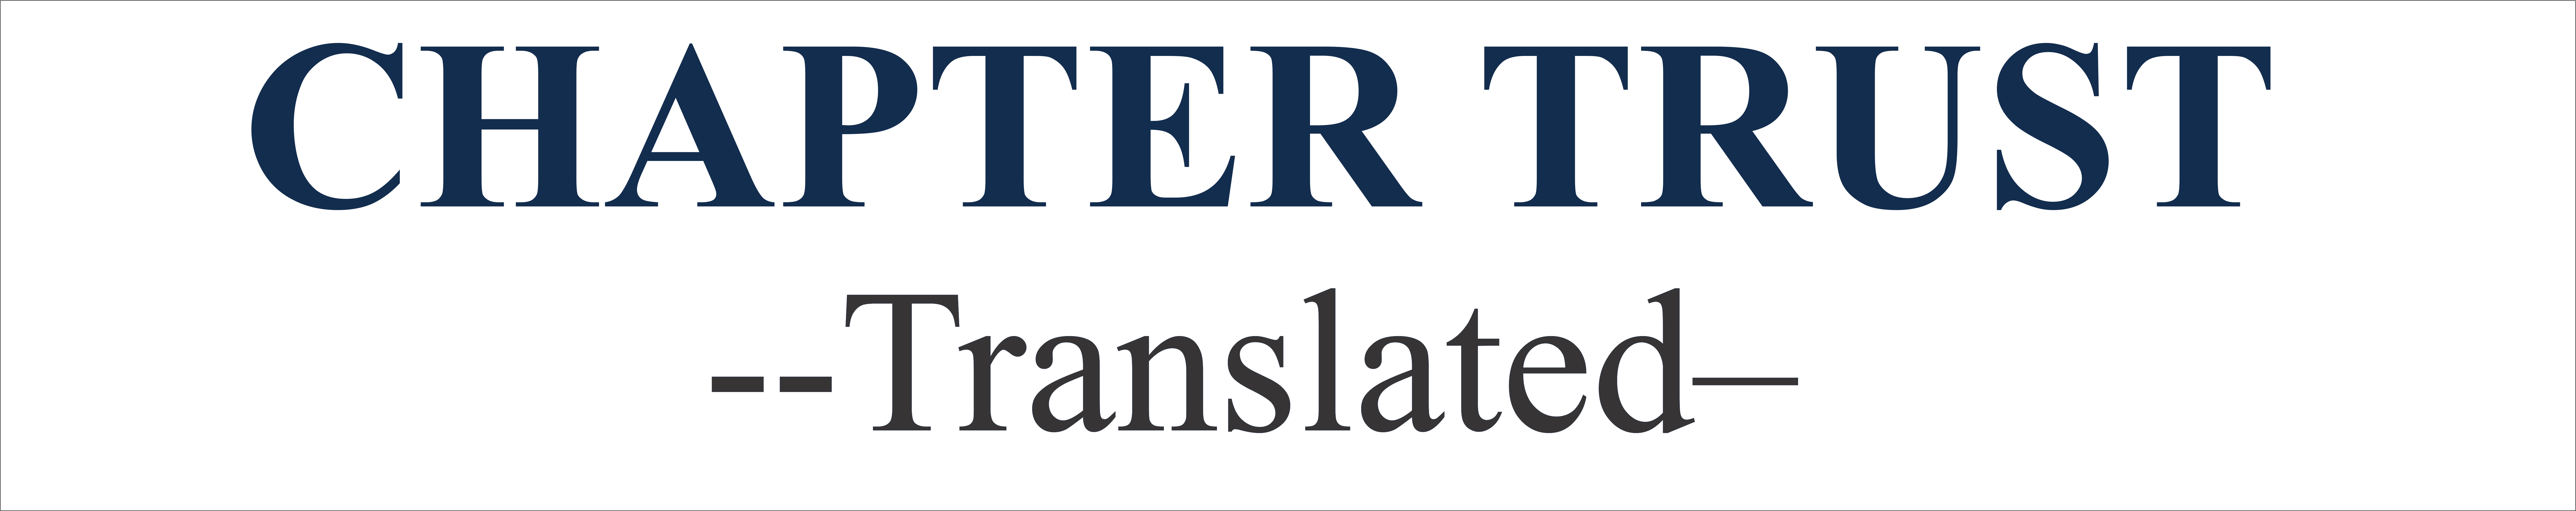 CHAPTER TRUST TRANSLATED BANK  